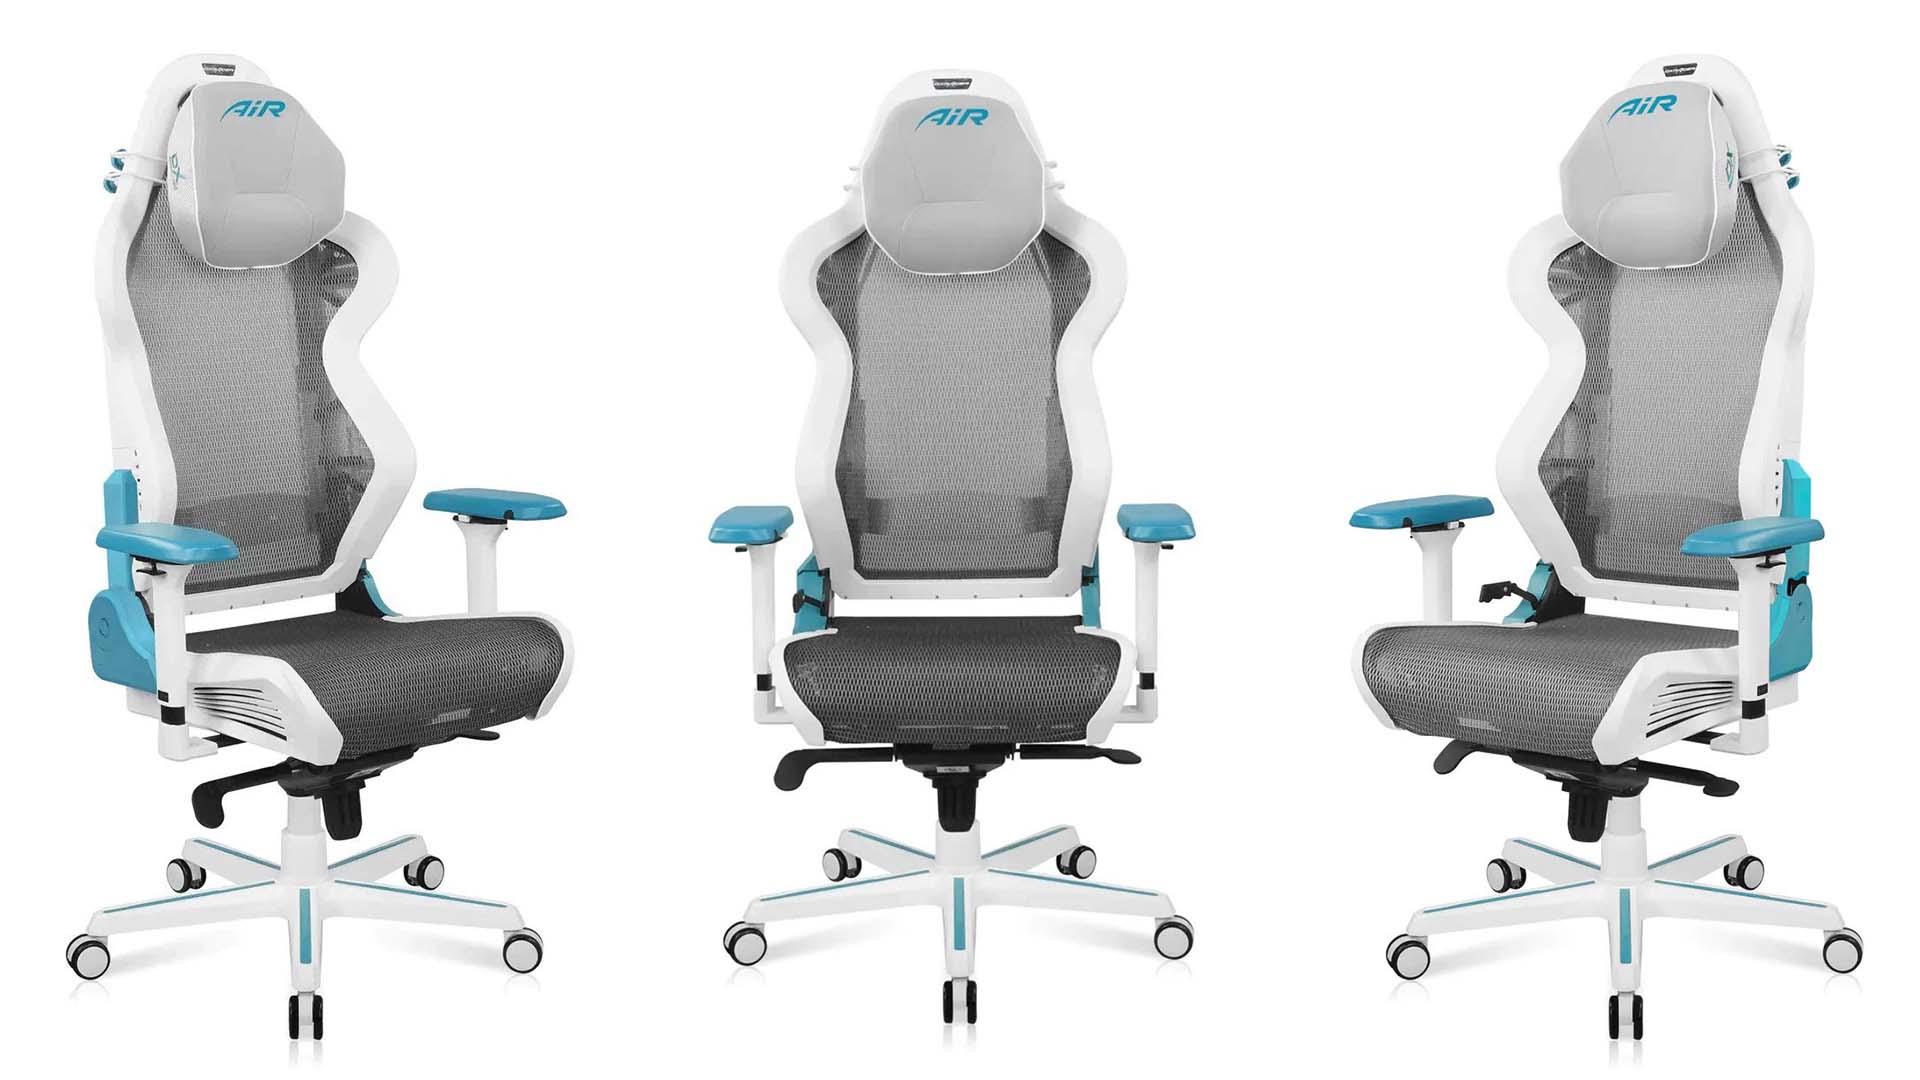 DXRacer From 3 Angles